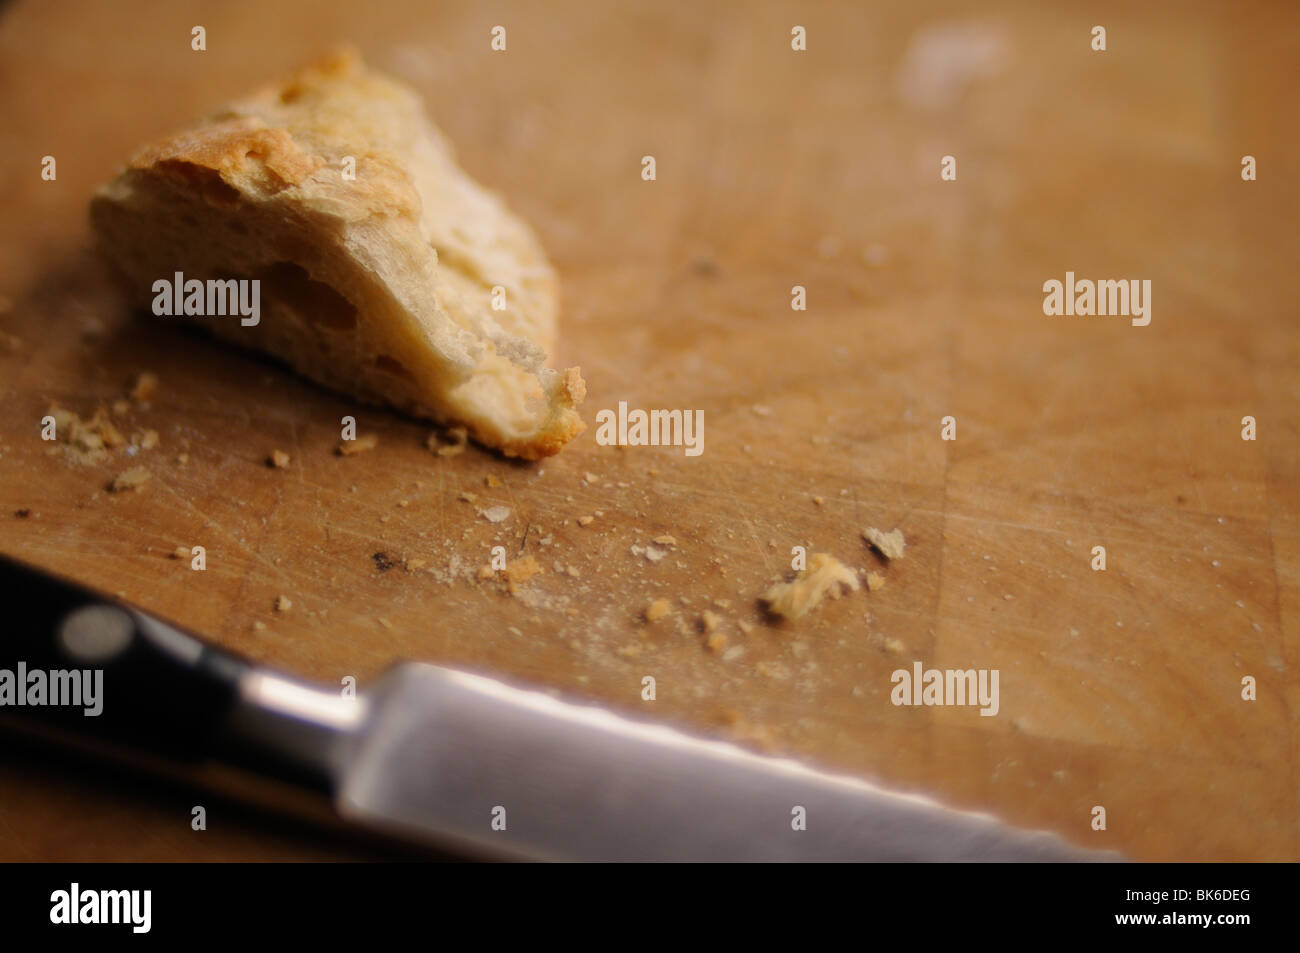 White bread slice and knife on a cutting board Stock Photo